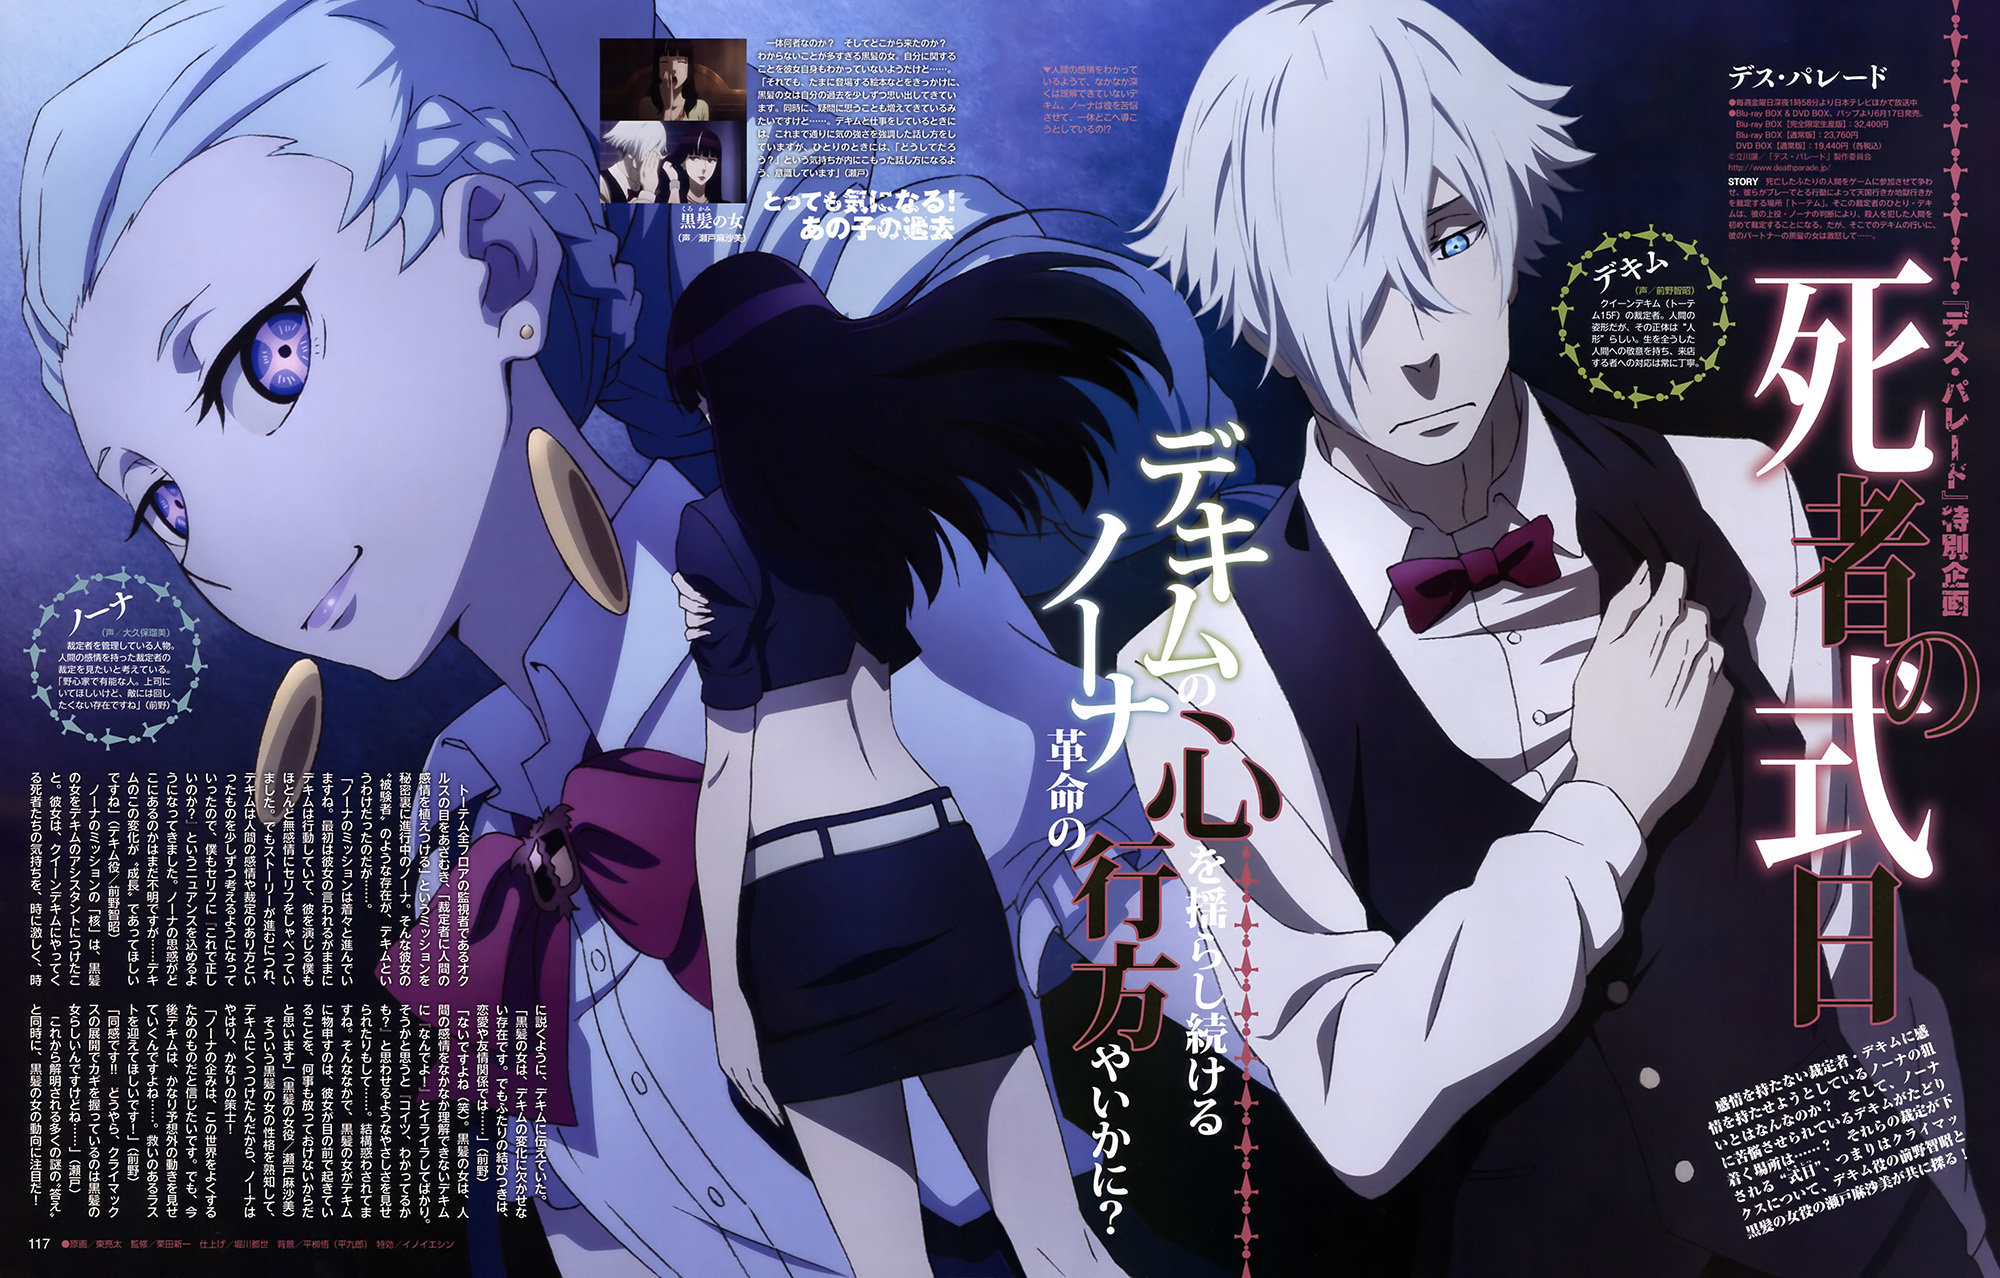 Nona - Death Parade - some art from Taiss14 on deviantart link